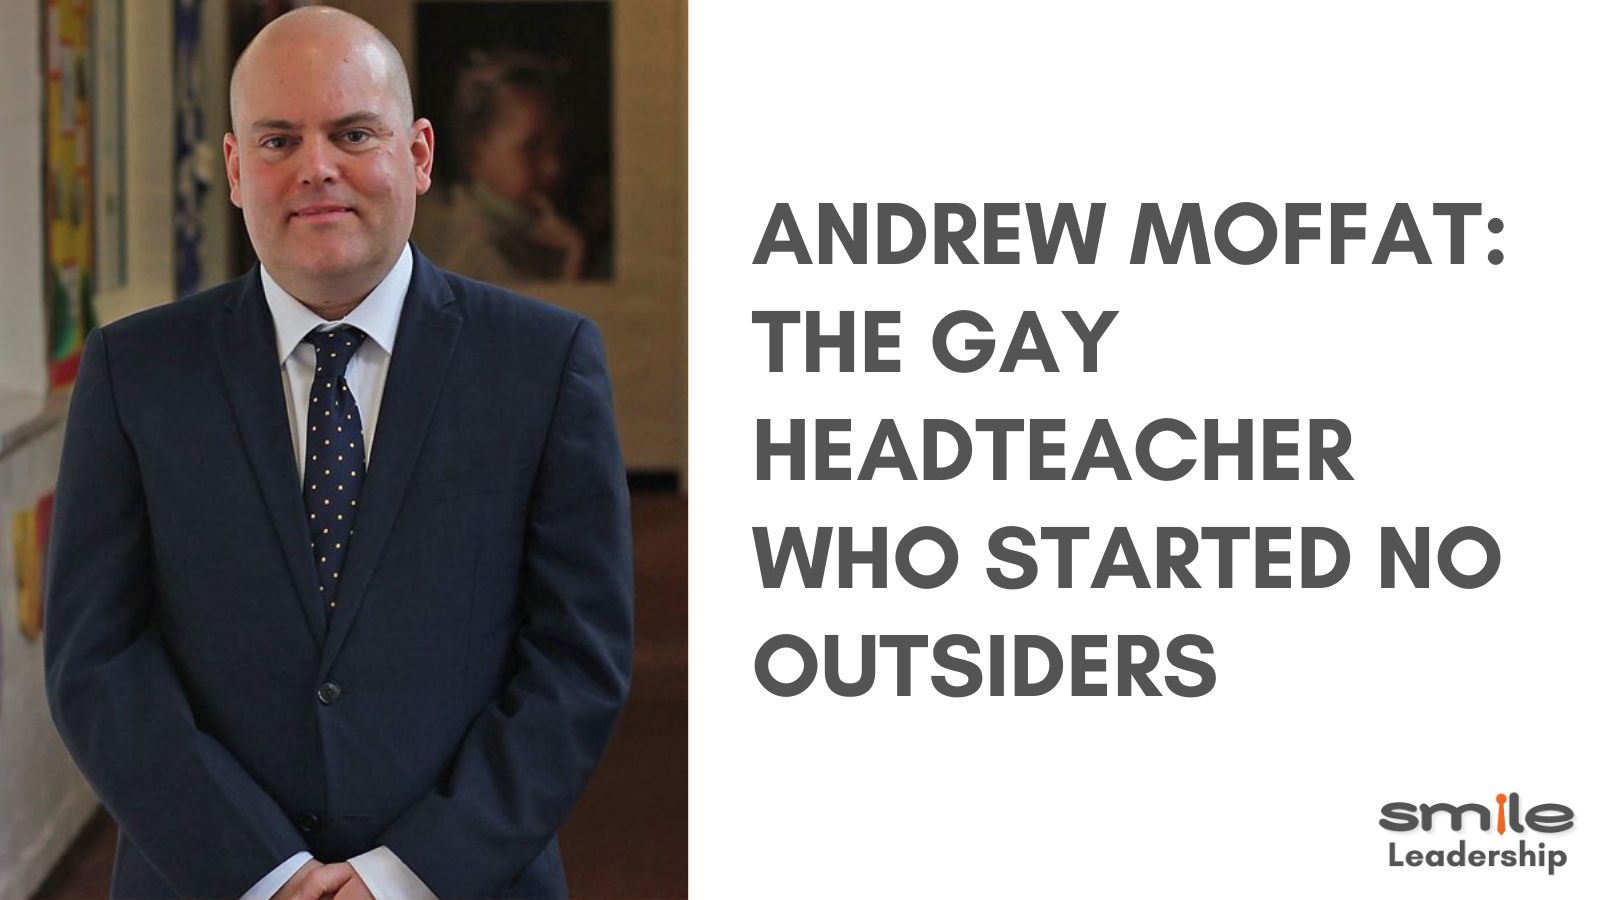 Andrew Moffat - The Gay Headteacher Who Started The No Outsiders Campaign